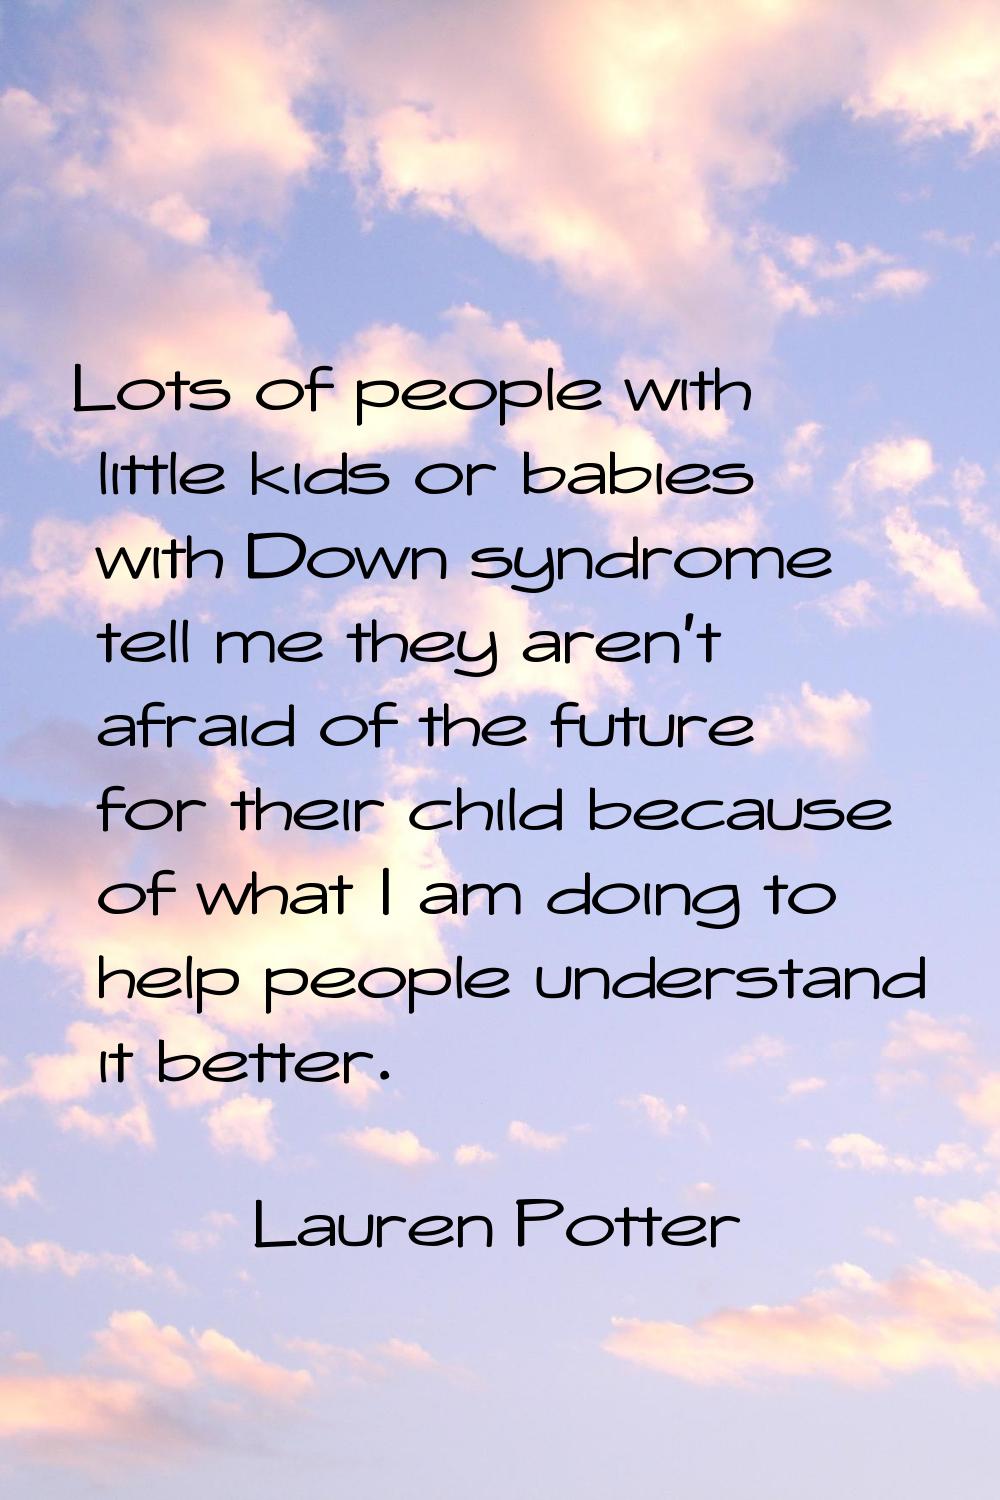 Lots of people with little kids or babies with Down syndrome tell me they aren't afraid of the futu